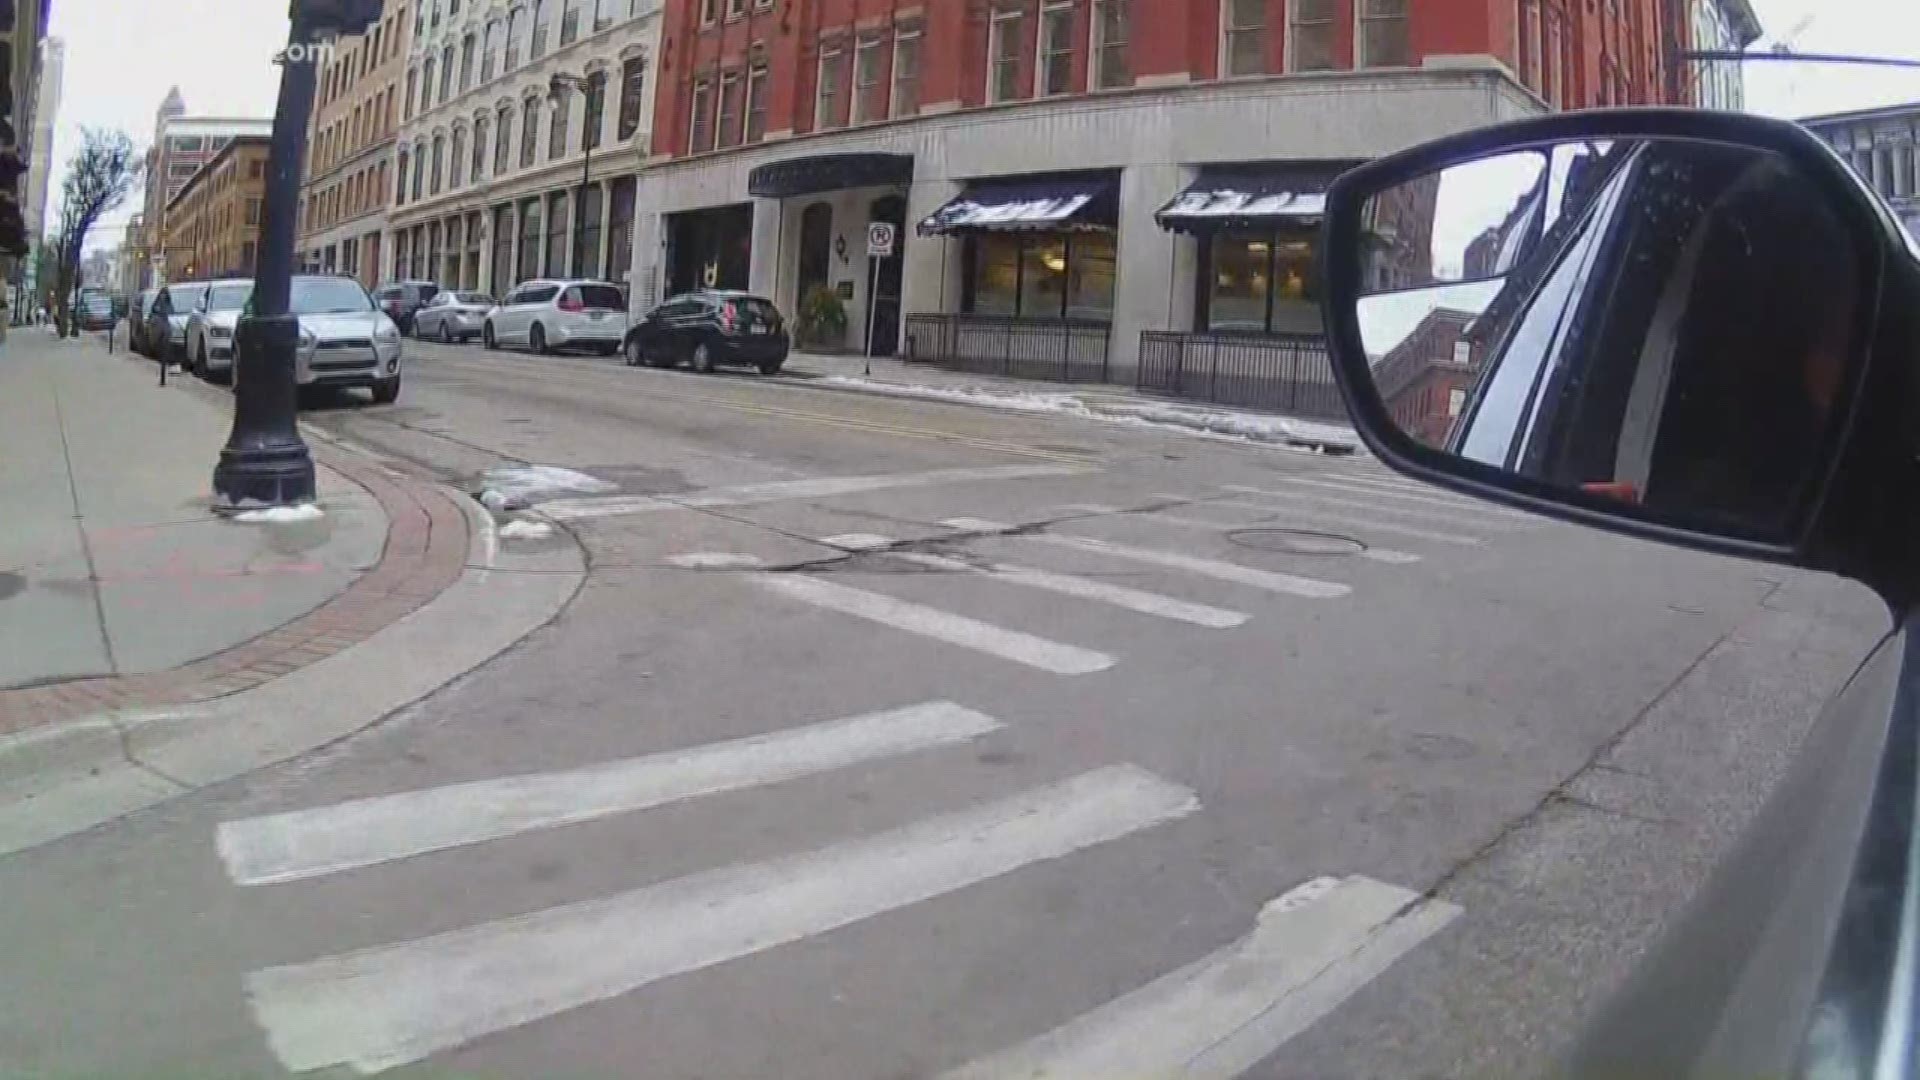 Traffic patterns could be changing at several streets in downtown Grand Rapids. Monday, some business owners said those changes could create dangerous conditions.